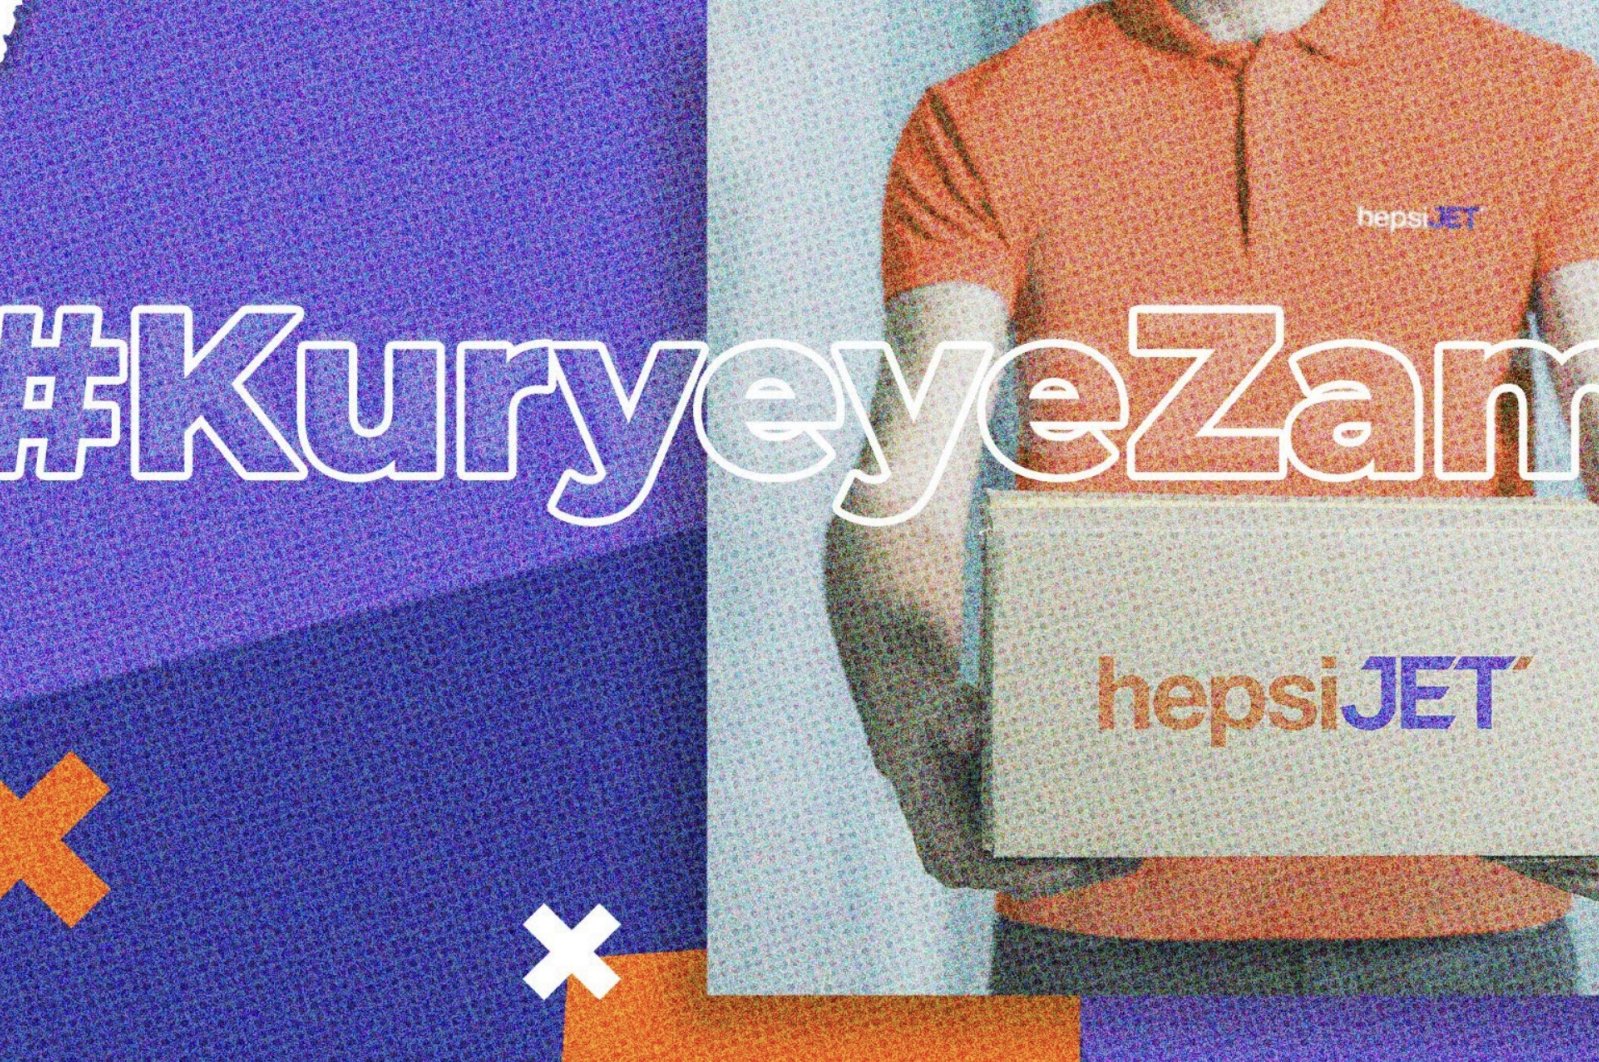 This image shared by HepsiJET employees on Twitter show a worker holding a box with the #KuryeyeZam (Raise to Carrier) hashtag over it (Photo taken from Twitter / hepsijetcalisan)